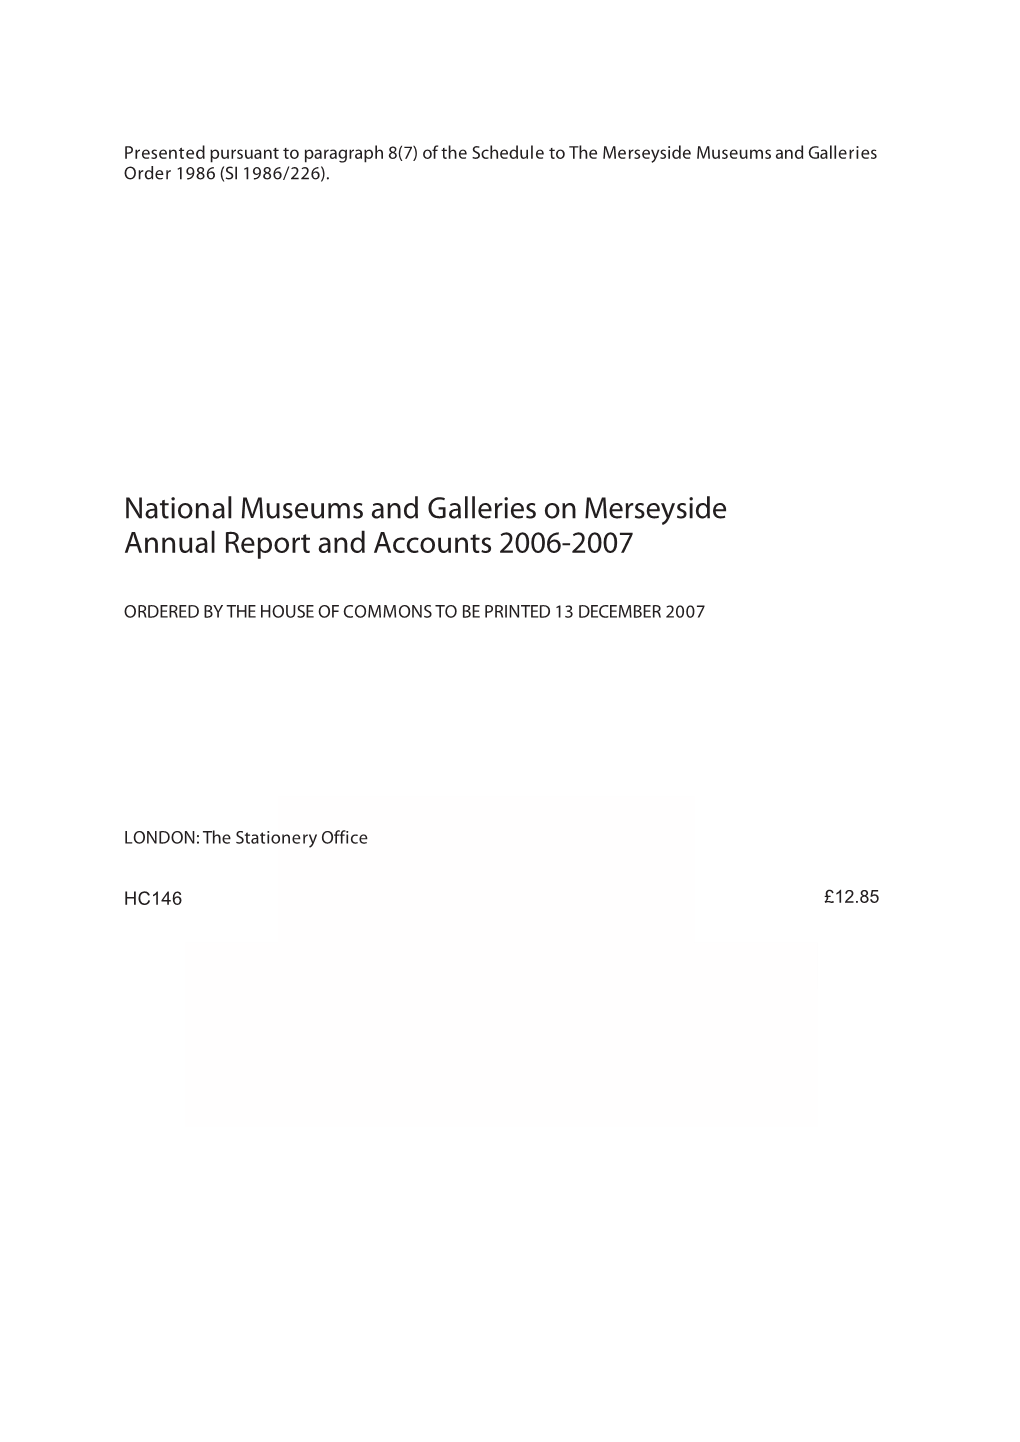 National Museums and Galleries on Merseyside Annual Report and Accounts 2006-2007